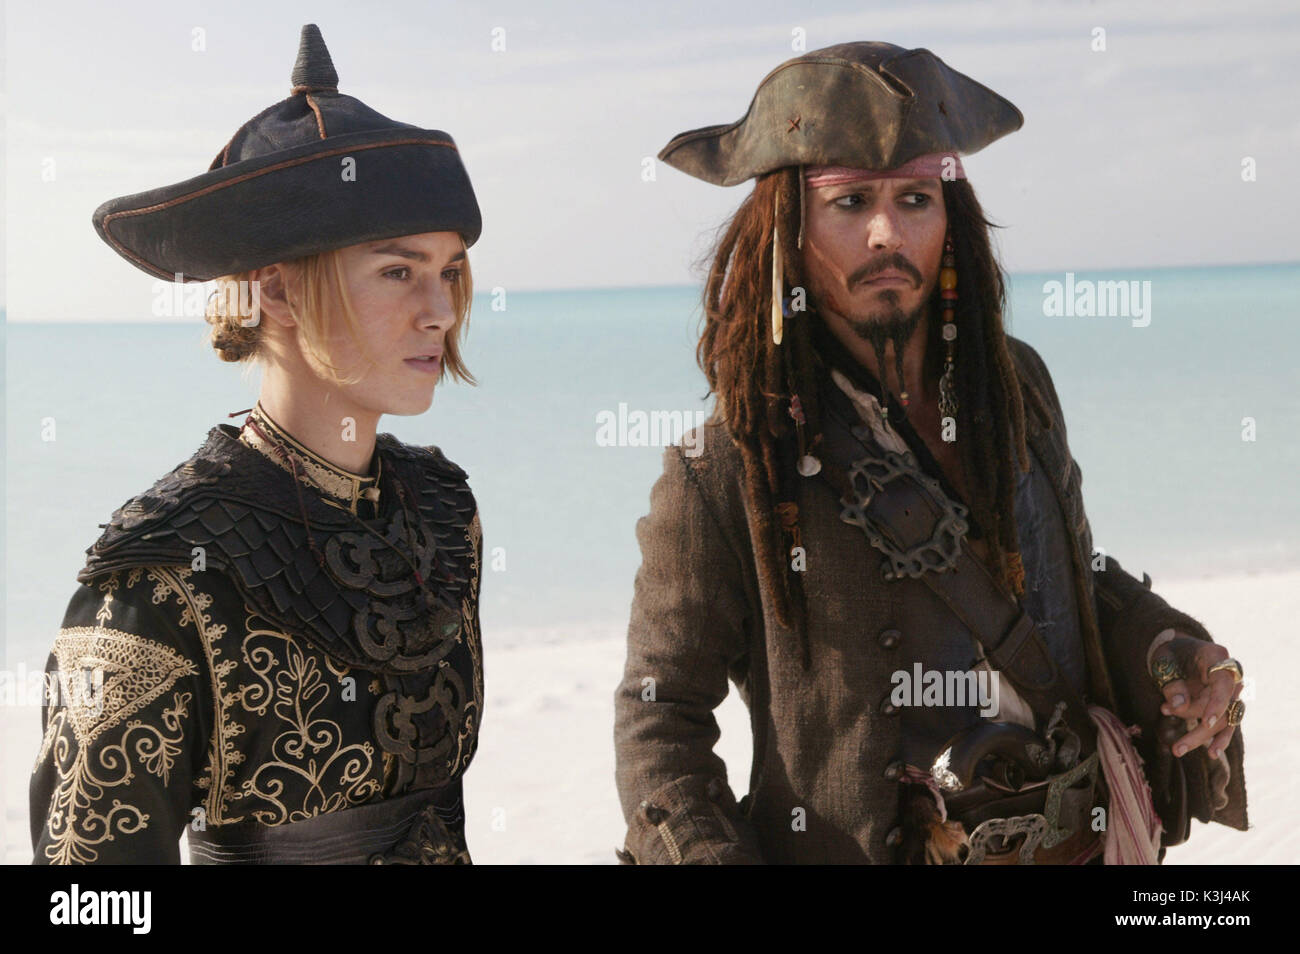 Pictured L-R: Elizabeth Swan (Keira Knightley) and Captain Jack Sparrow (Johnny Depp), in a scene from PIRATES OF THE CARIBBEAN: AT WORLD'S END, directed by Gore Verbinski and produced by Jerry Bruckheimer, from a screenplay written by Ted Elliott & Terry Rossio. PIRATES OF THE CARIBBEAN: AT WORLD'S END [US 2007]  aka PIRATES OF THE CARIBBEAN 3  KEIRA KNIGHTLEY as Elizabeth Swan,  JOHNNY DEPP as Captain Jack Sparrow    Pictured L-R: Elizabeth Swan (Keira Knightley) and Captain Jack Sparrow (Johnny Depp), in a scene from PIRATES OF THE CARIBBEAN: AT WORLD'S END, directed by Gore Verbinski a Stock Photo